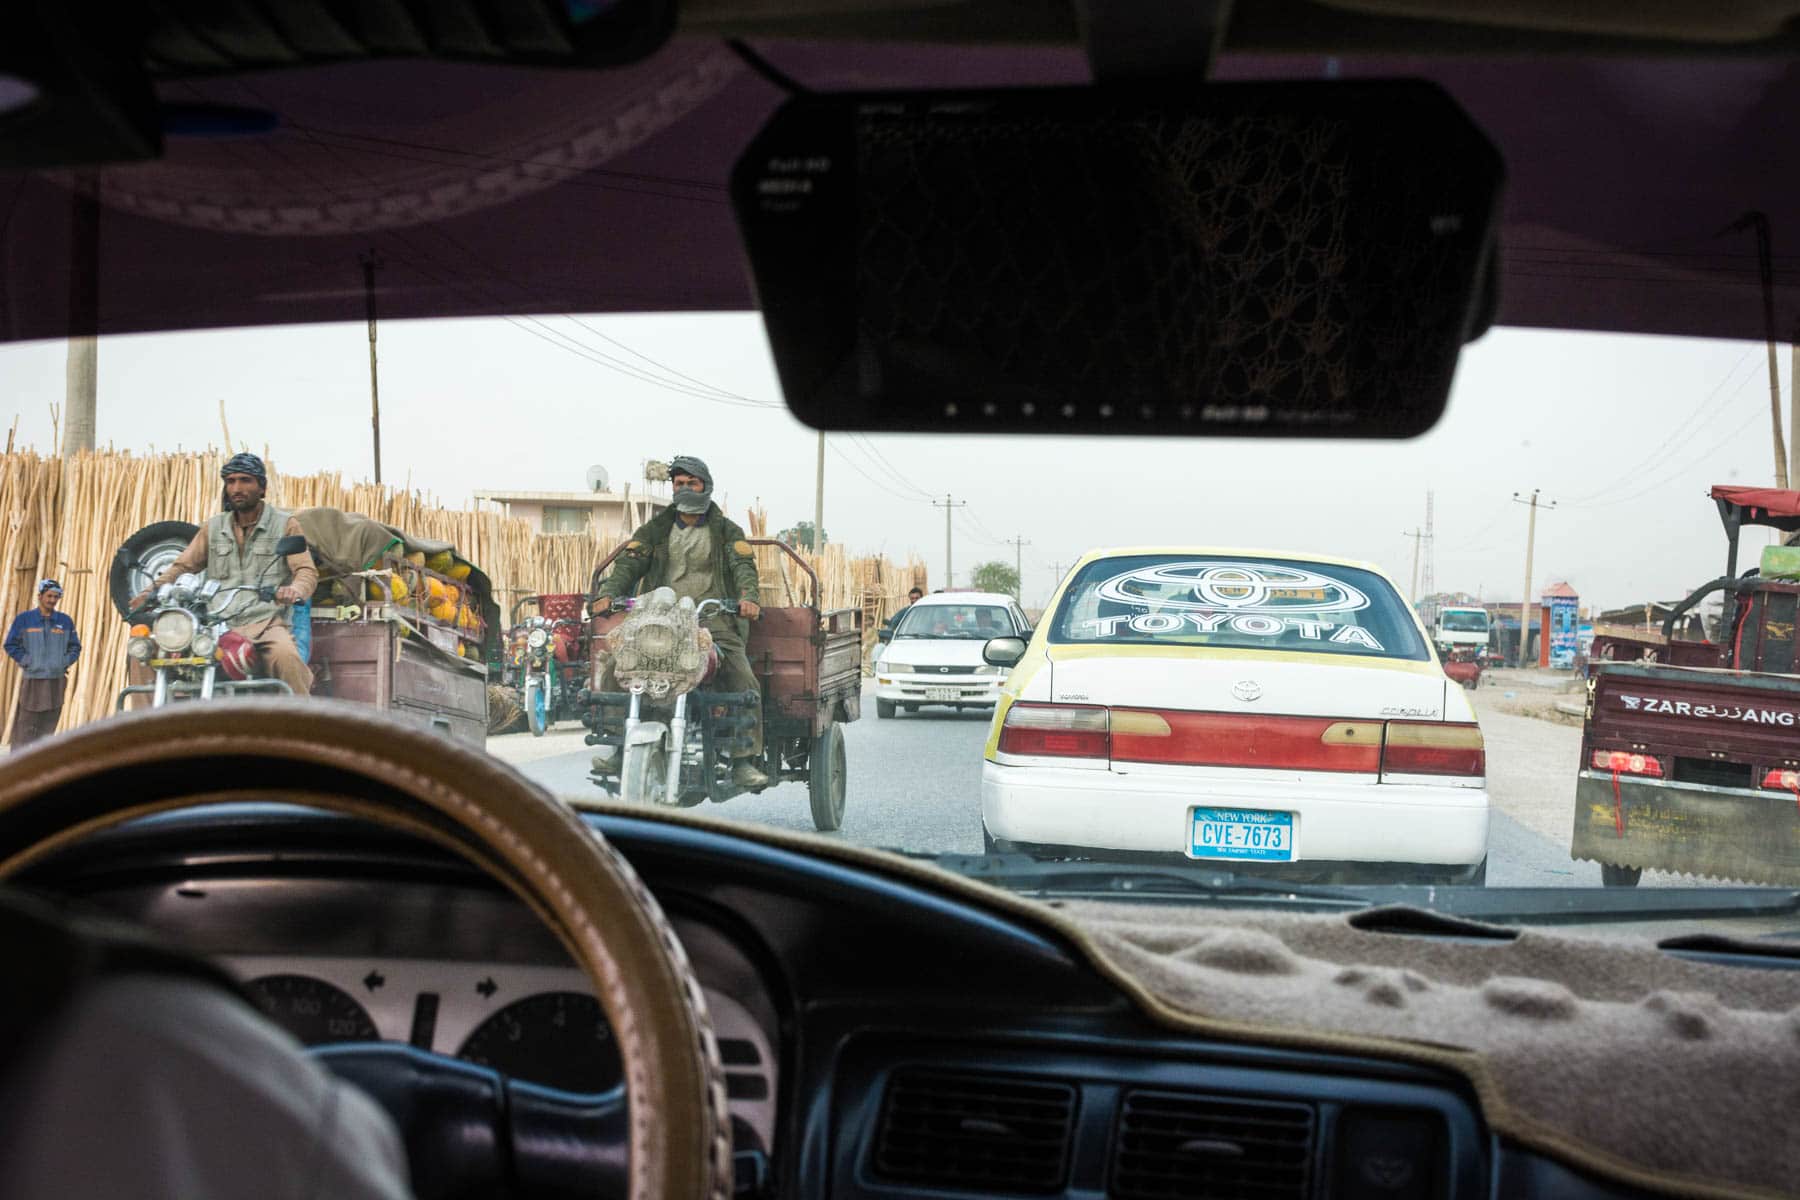 The inside of a taxi in Mazar-i-Sharif, Afghanistan